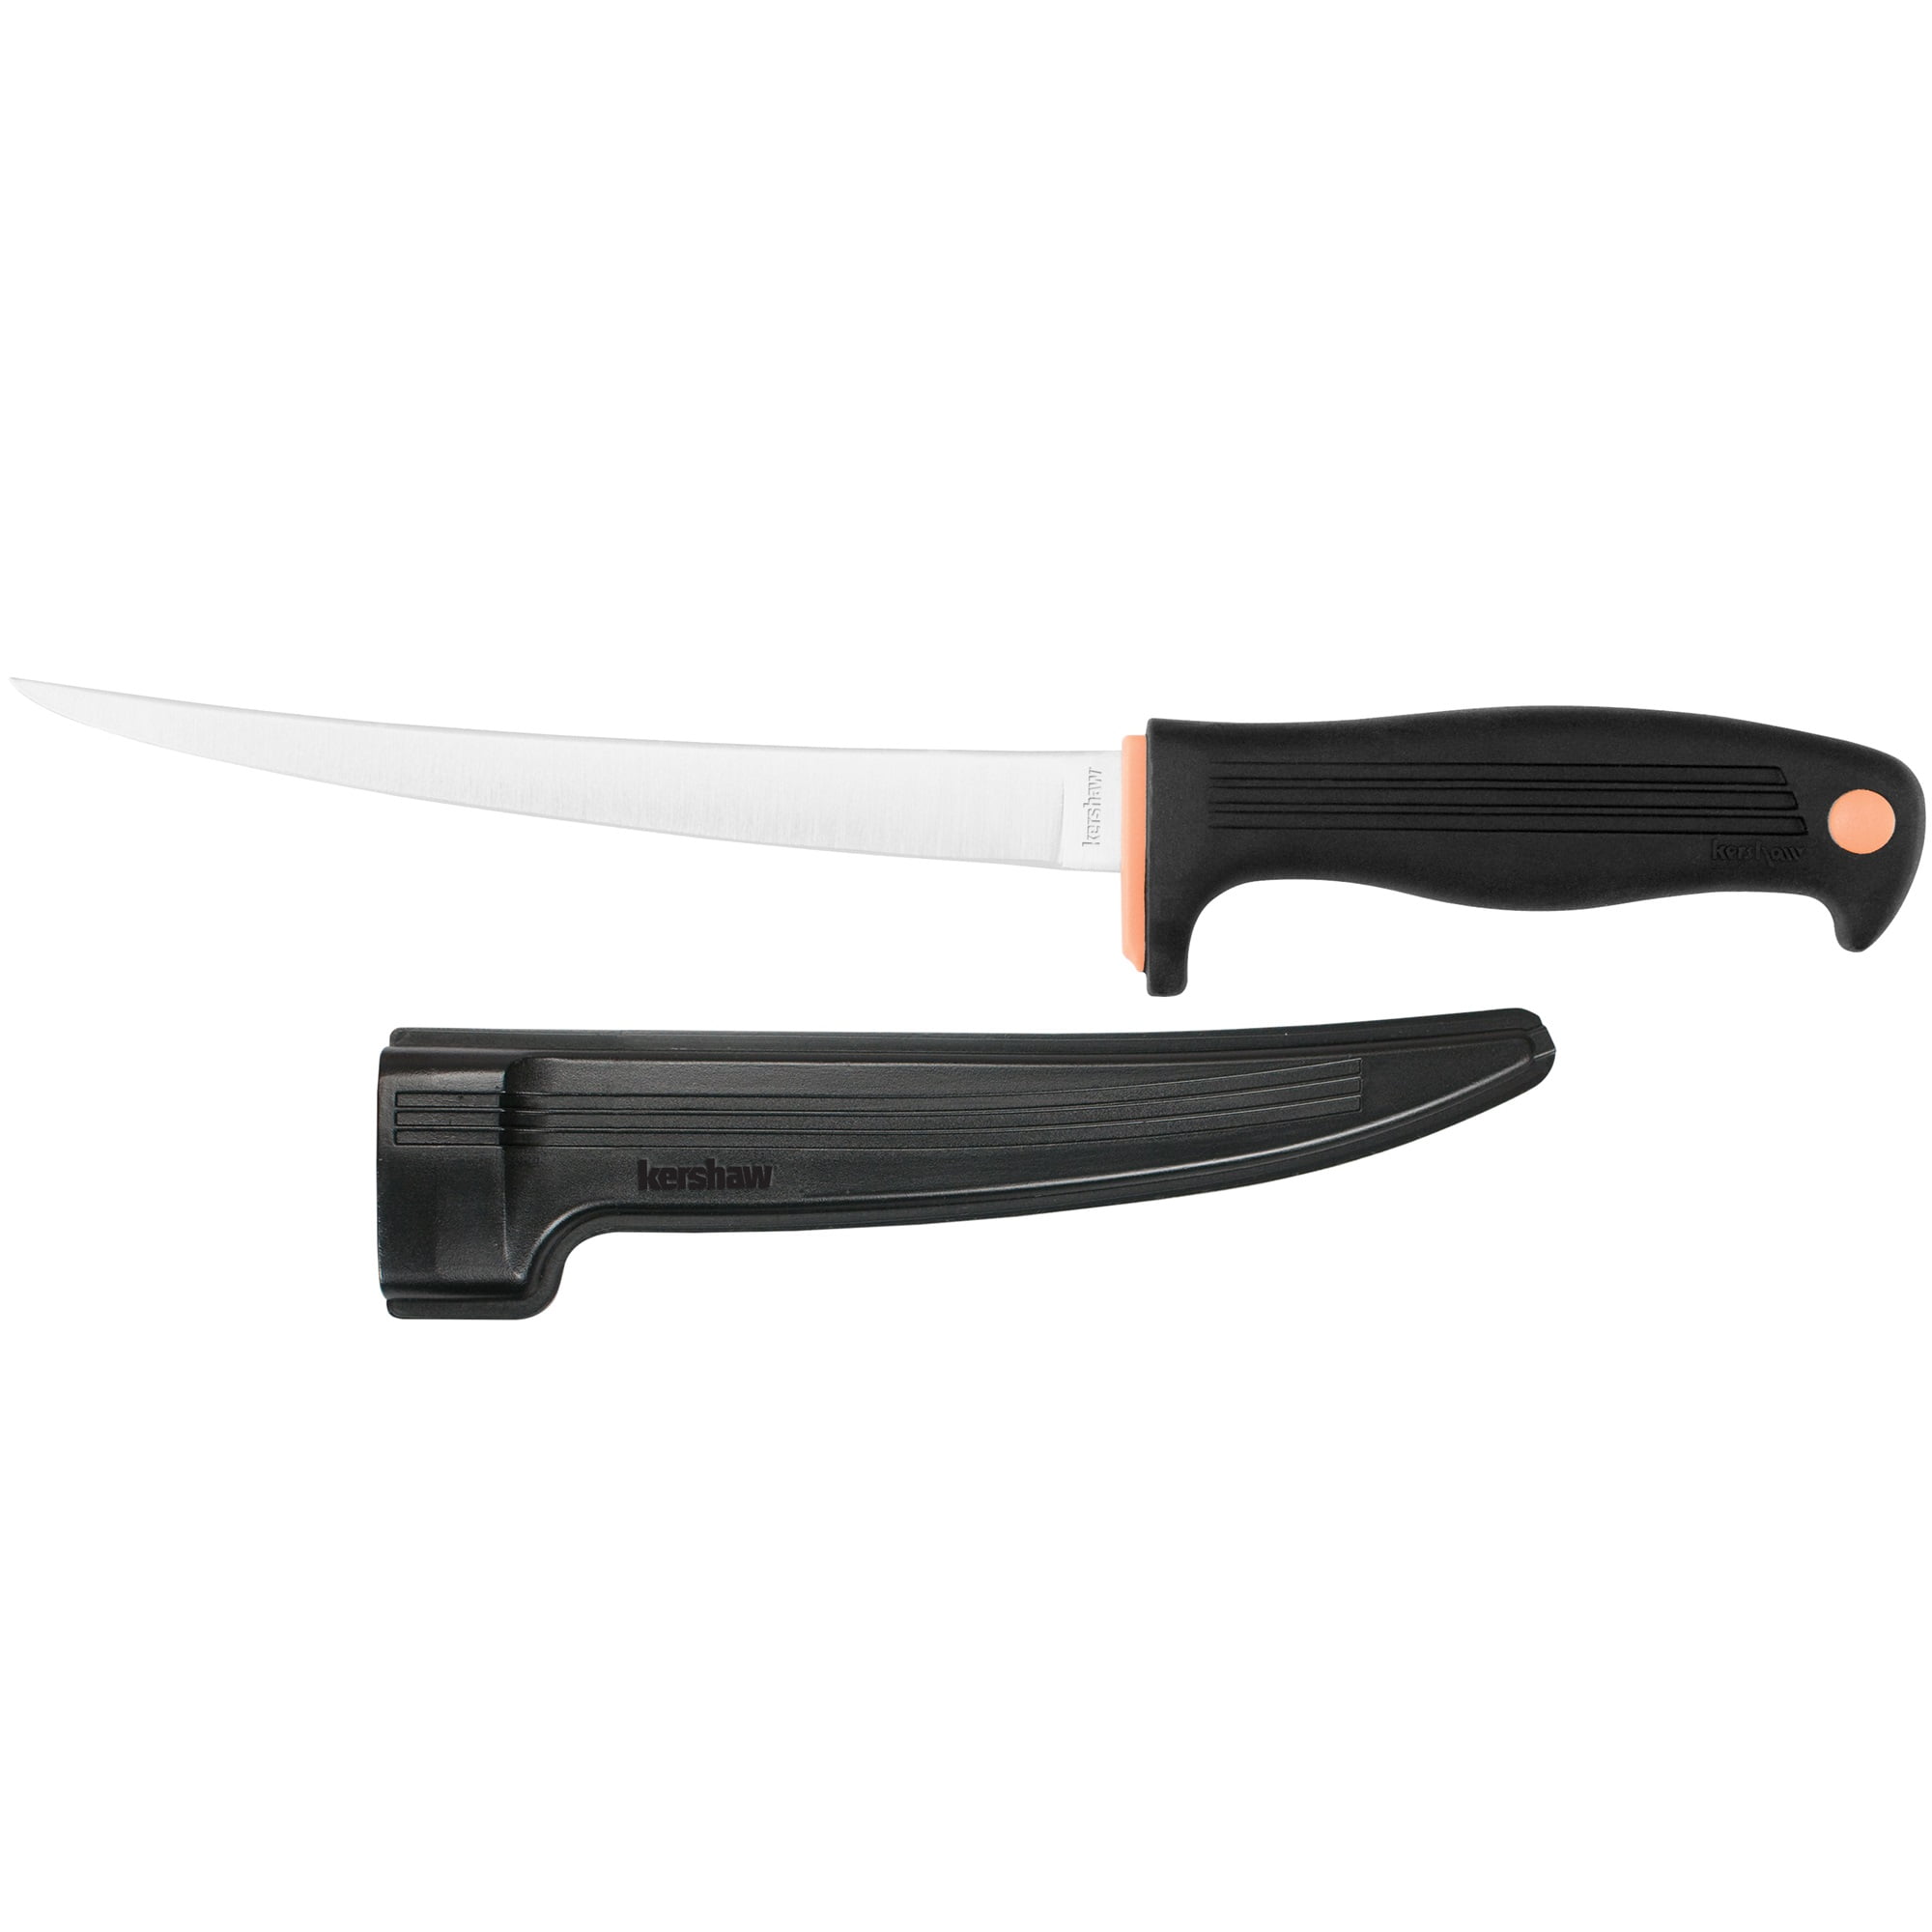 Kershaw Clearwater Fish Fillet Knife with Protective Sheath, 7